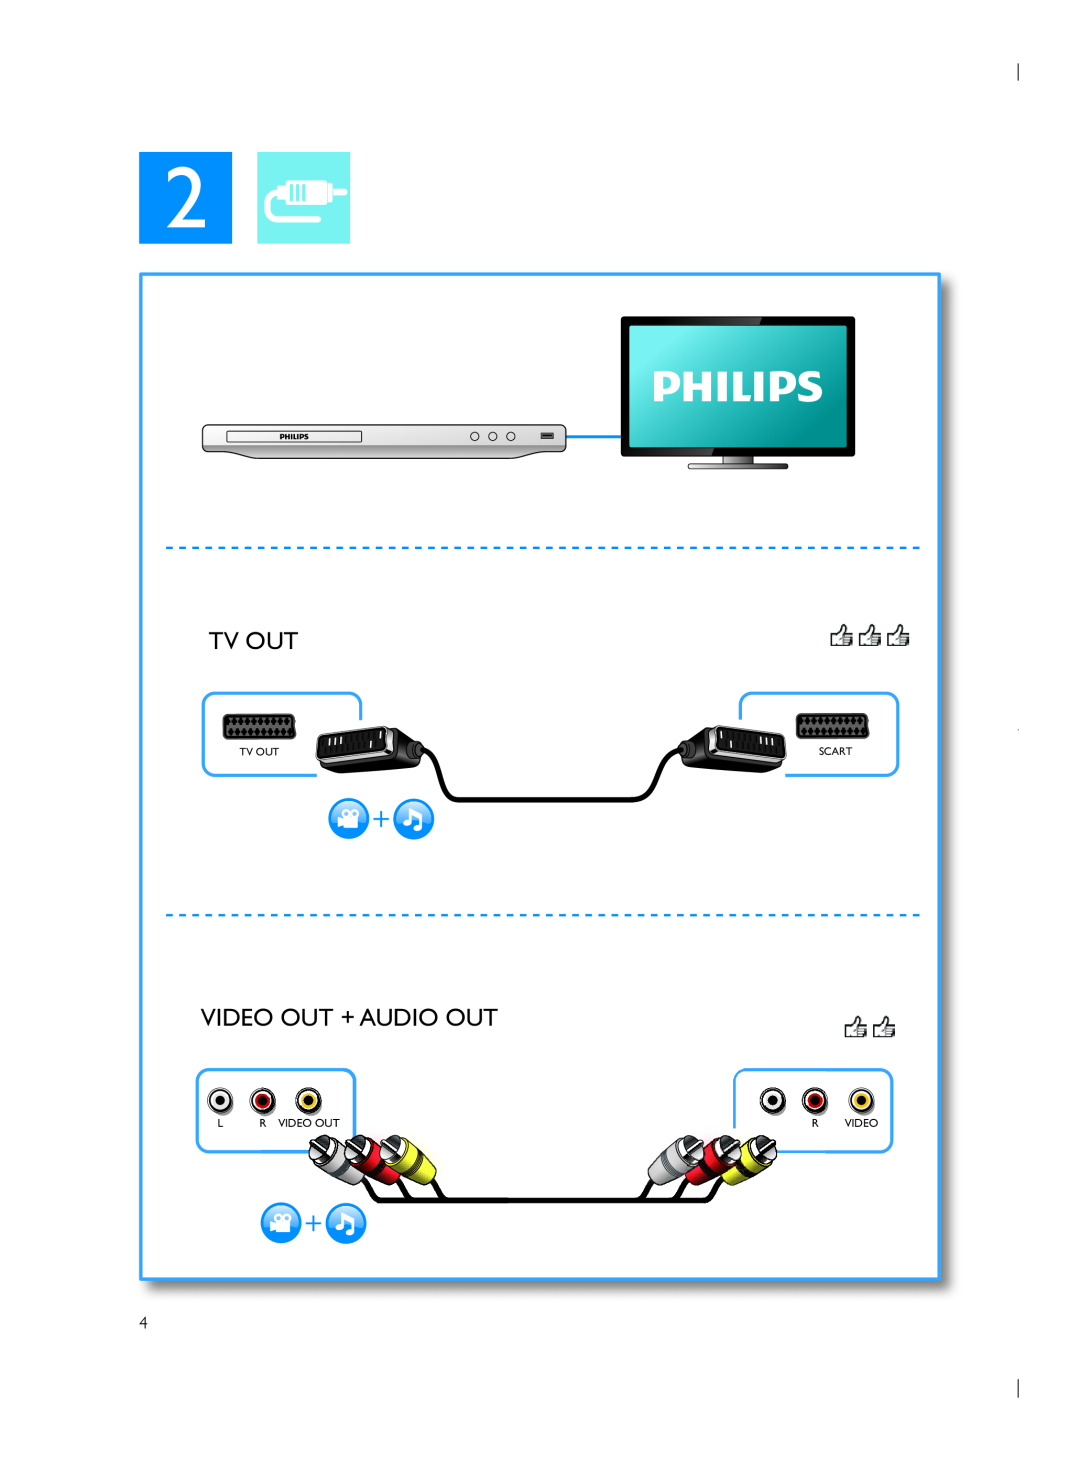 Philips DVP3950 user manual Tv Out, Video Out + Audio Out, Scart 